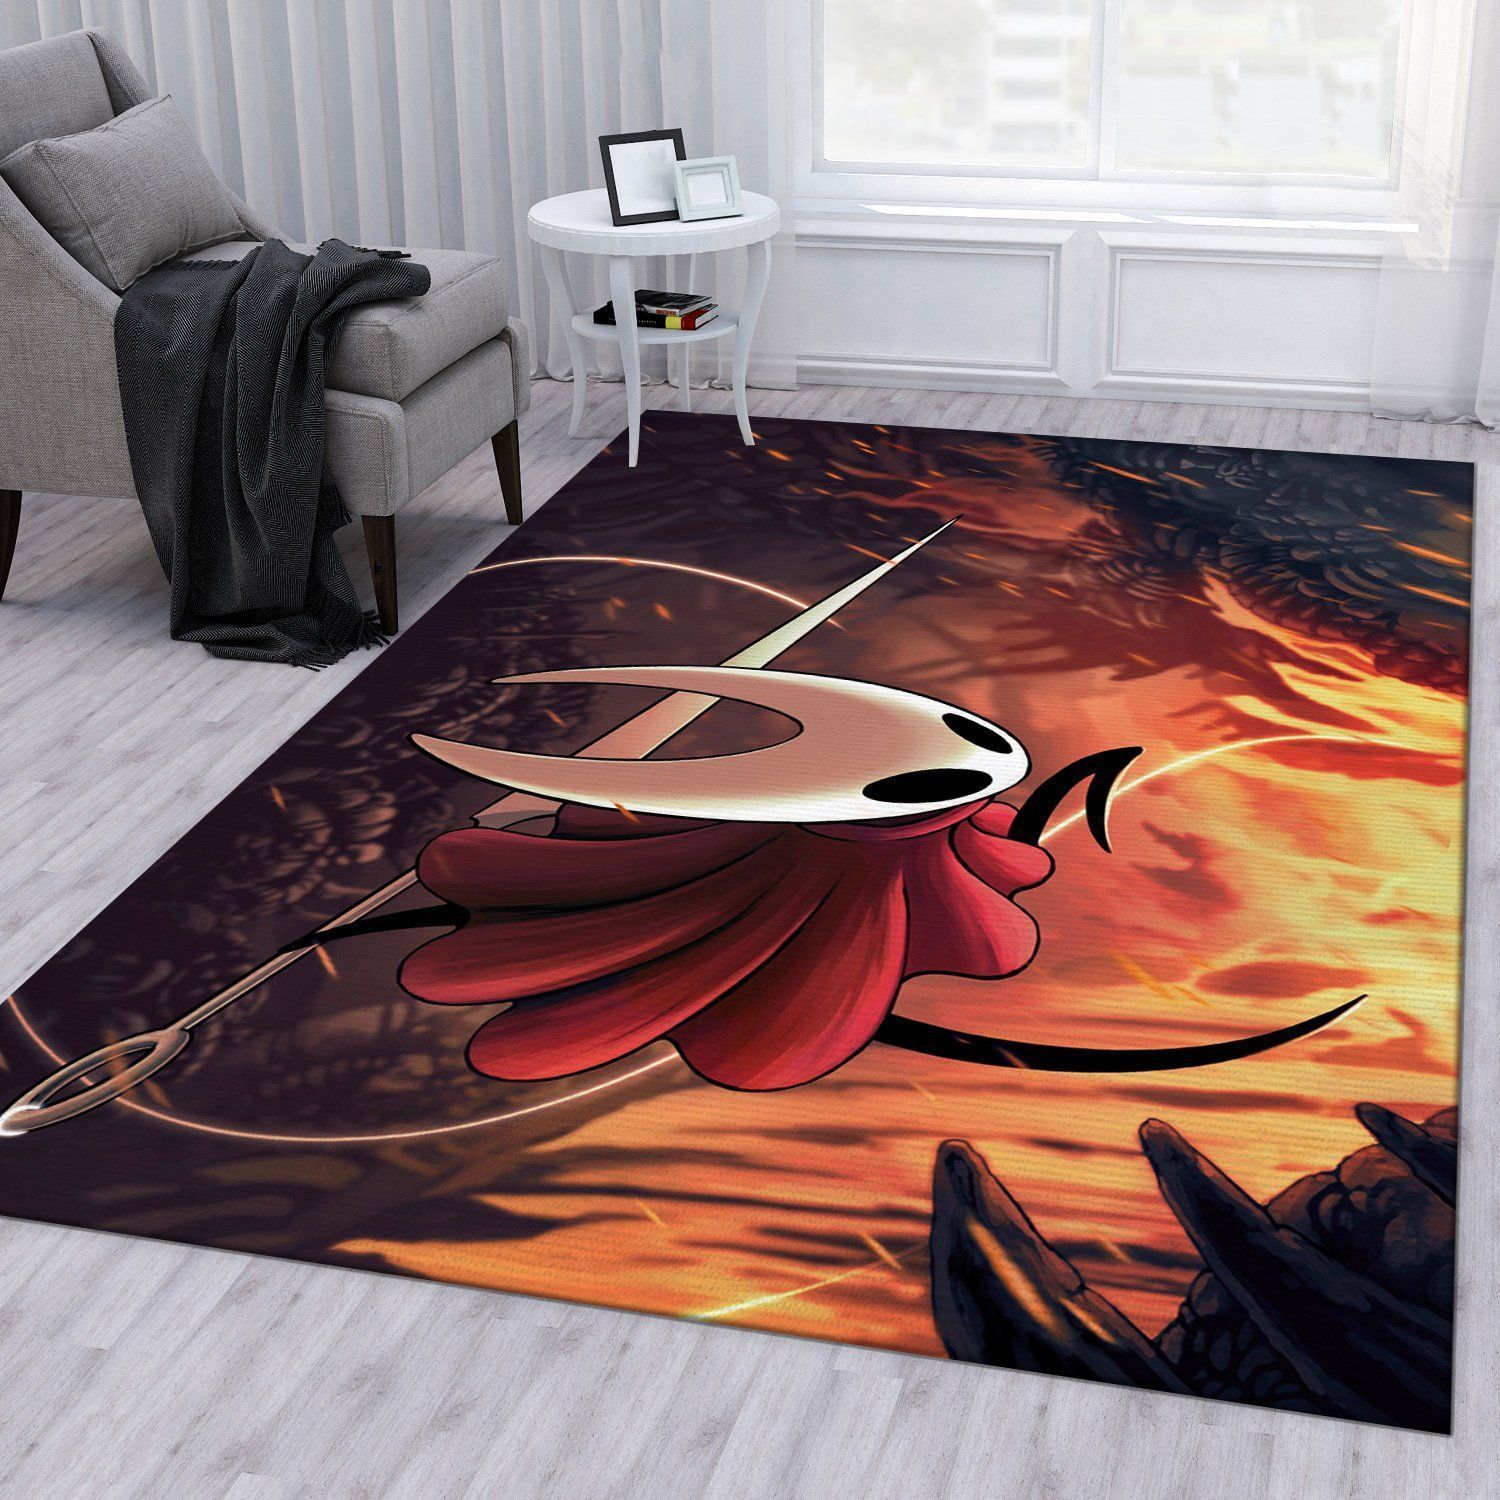 Hollow Knight Ver12 Rug Living Room Rug Home US Decor - Indoor Outdoor Rugs